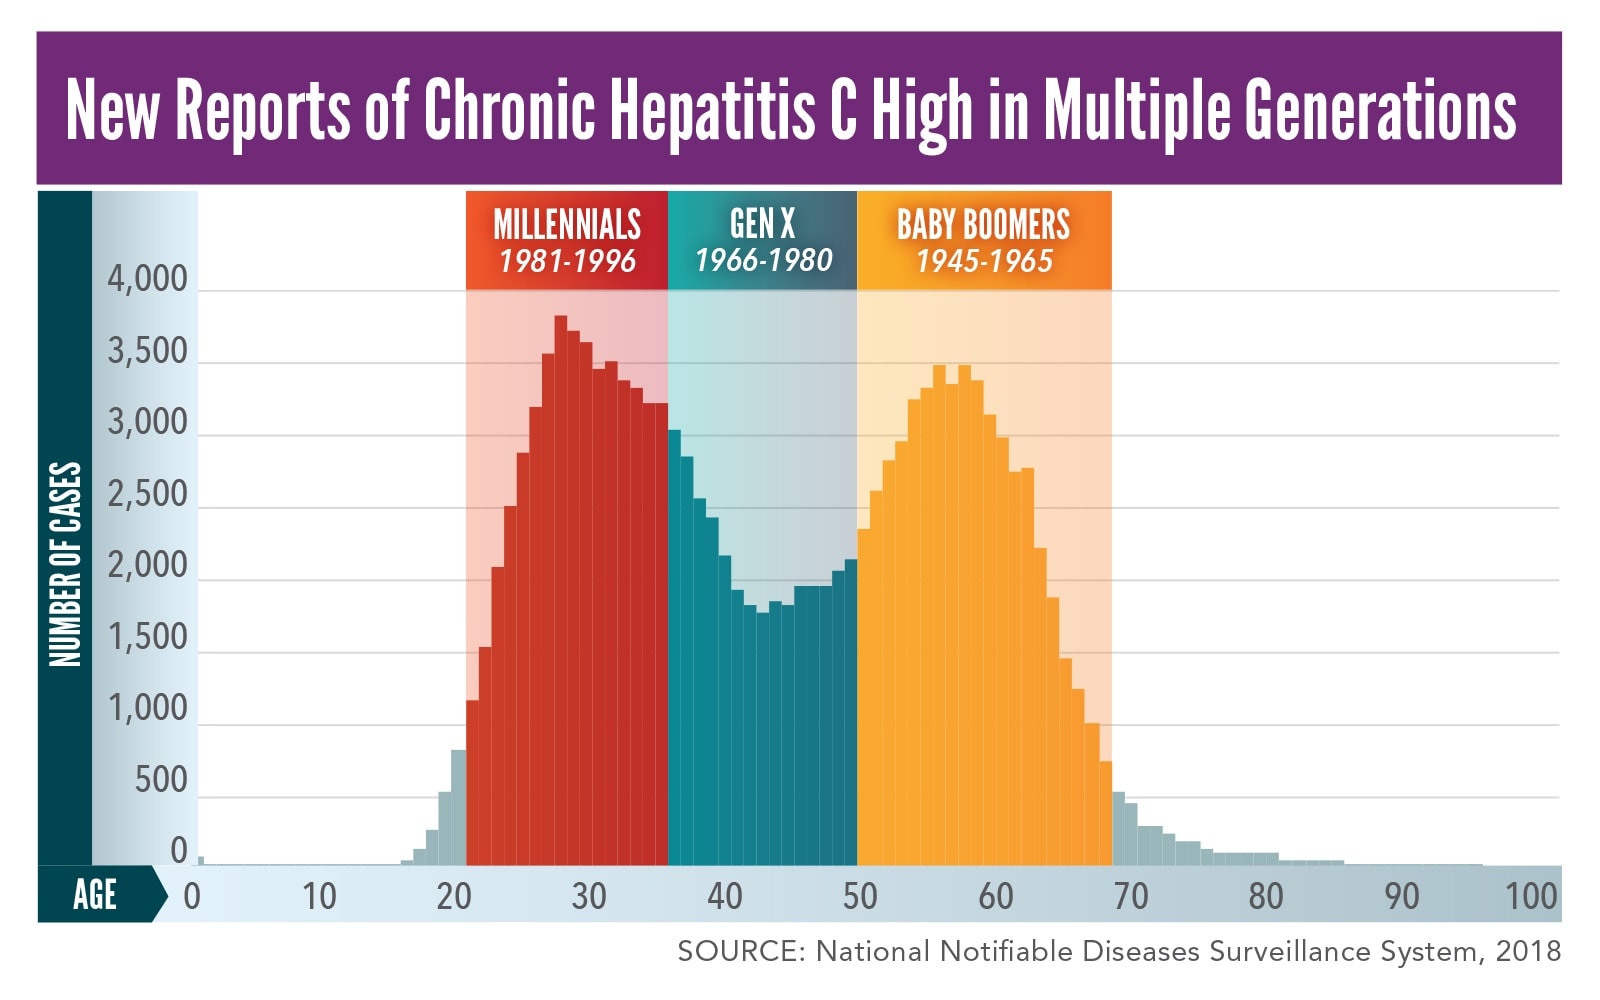 New Reports of Chronic Hepatitis C High in Multiple Generations